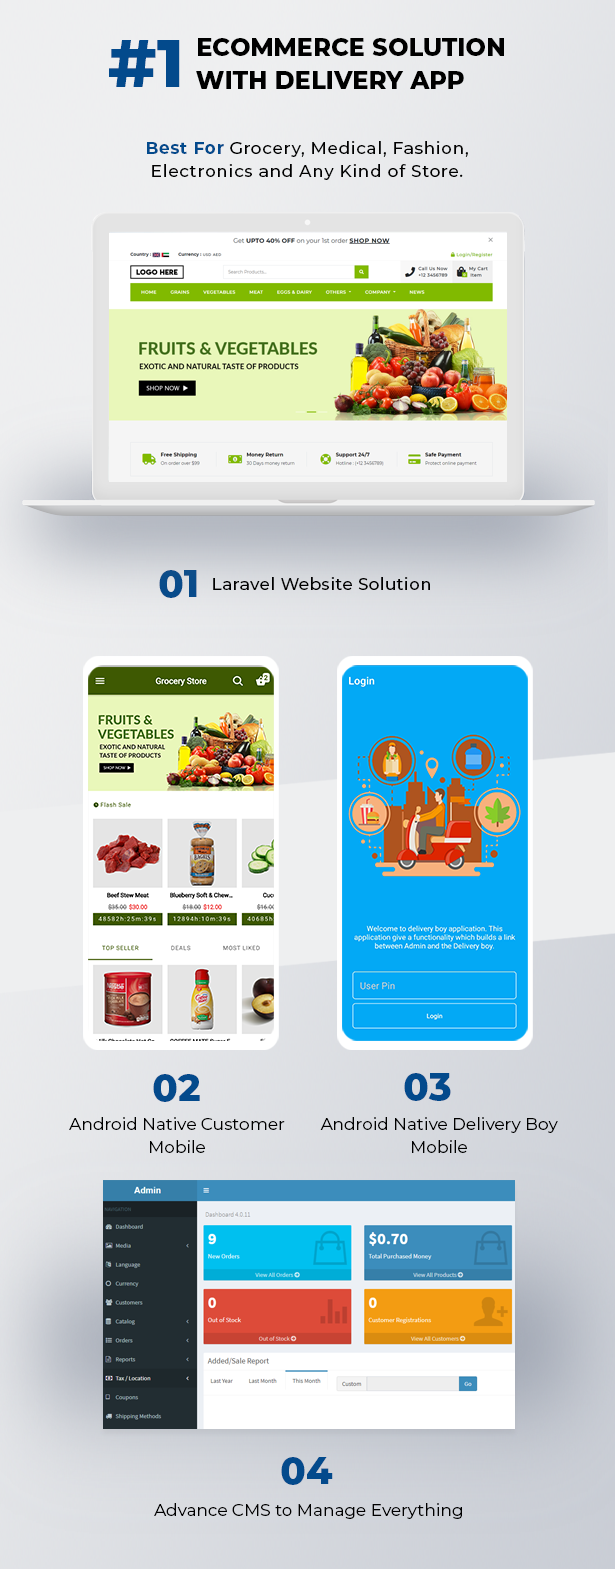 Ecommerce Solution with Delivery App For Grocery, Food, Pharmacy, Any Store / Laravel + Android Apps - 2